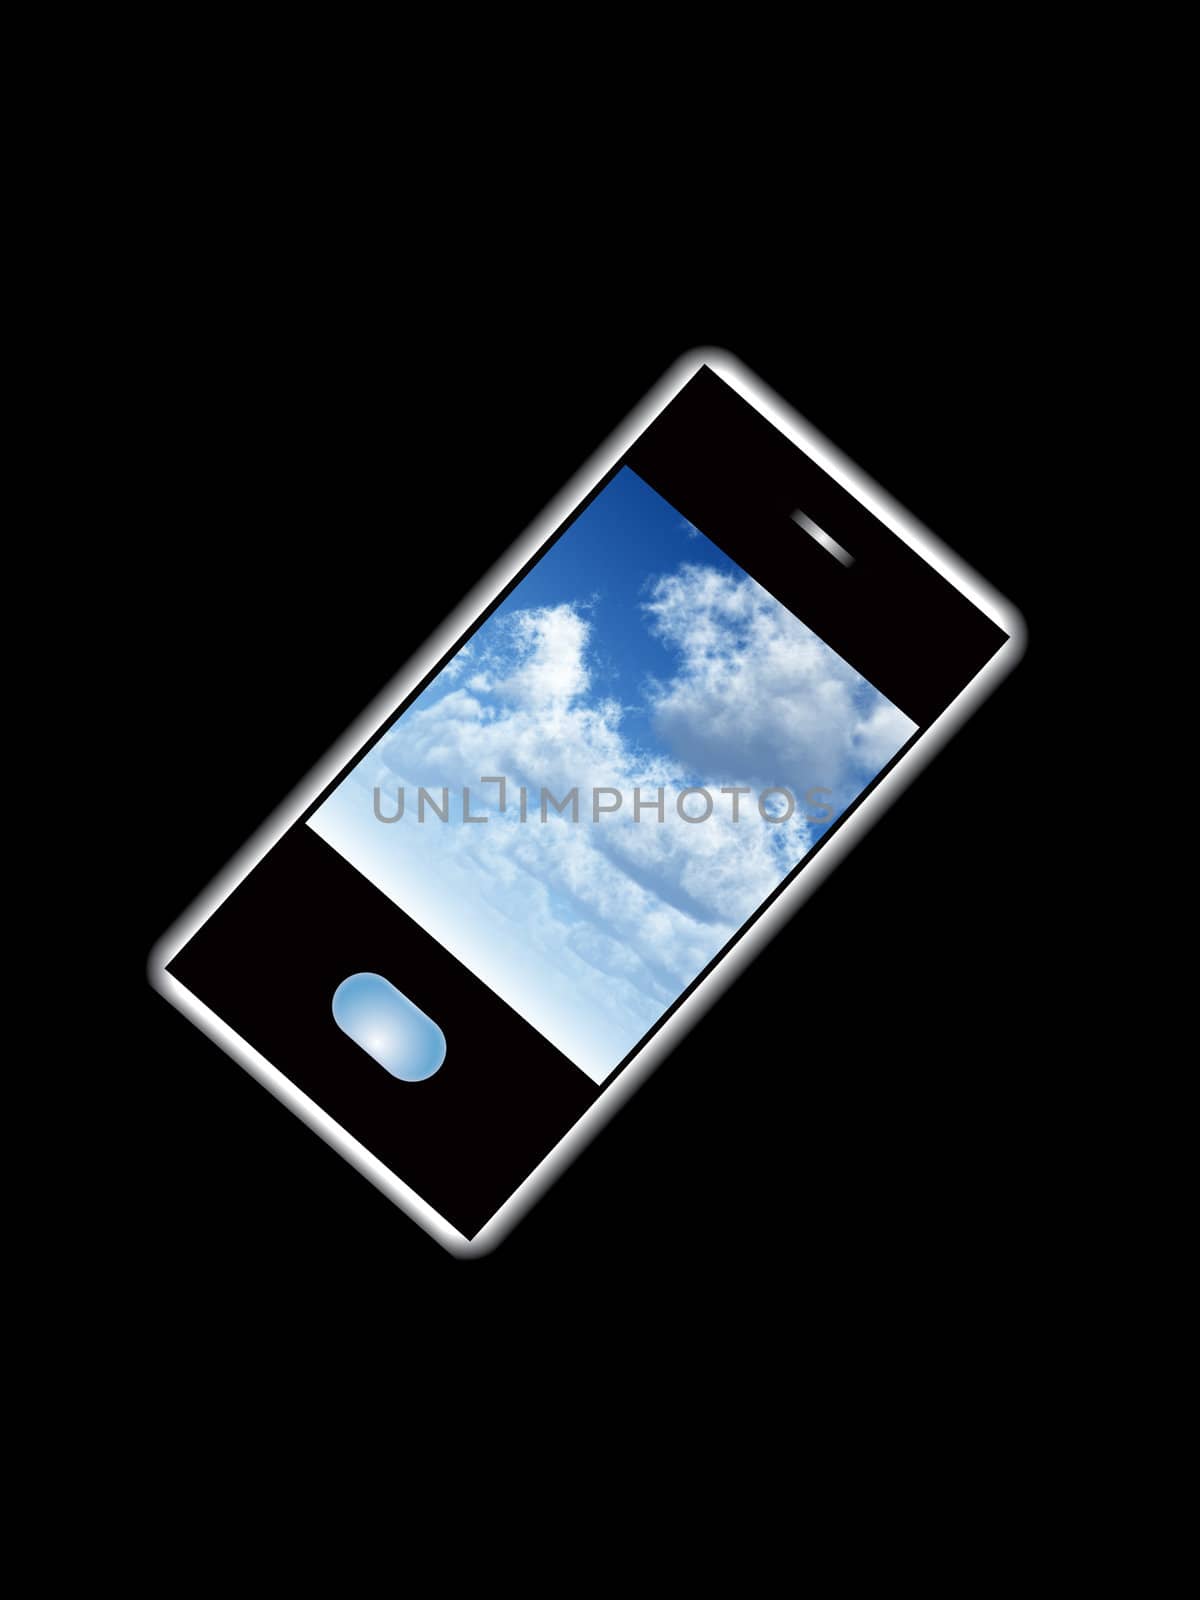 A mobile phone with a cloud screensaver.